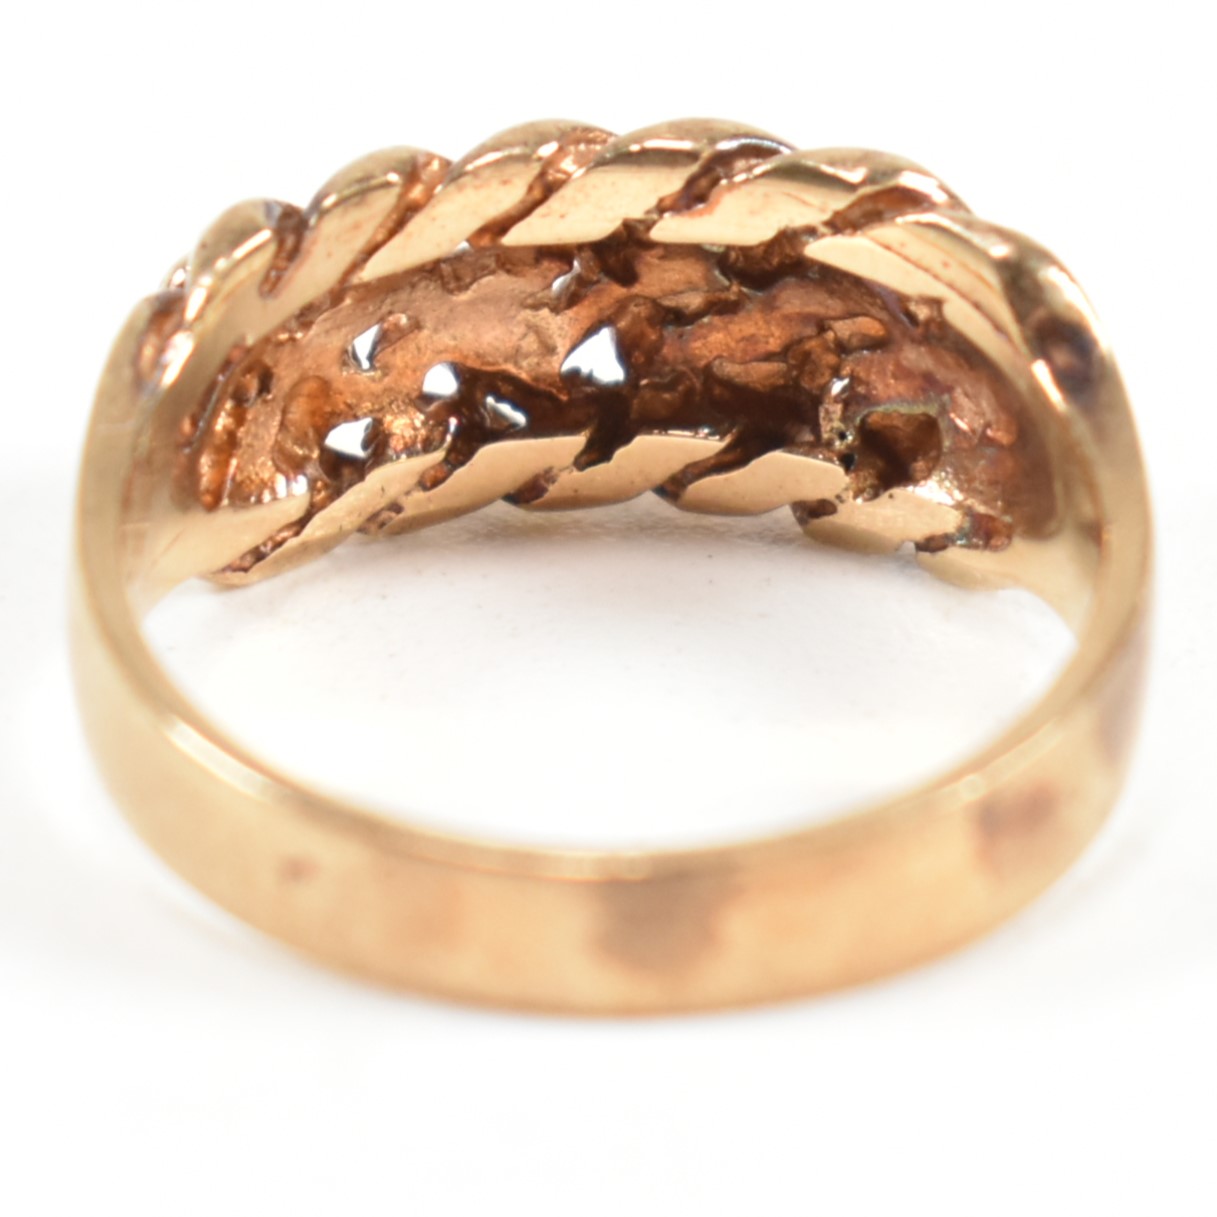 HALLMARKED 9CT GOLD KEEPER RING - Image 3 of 10